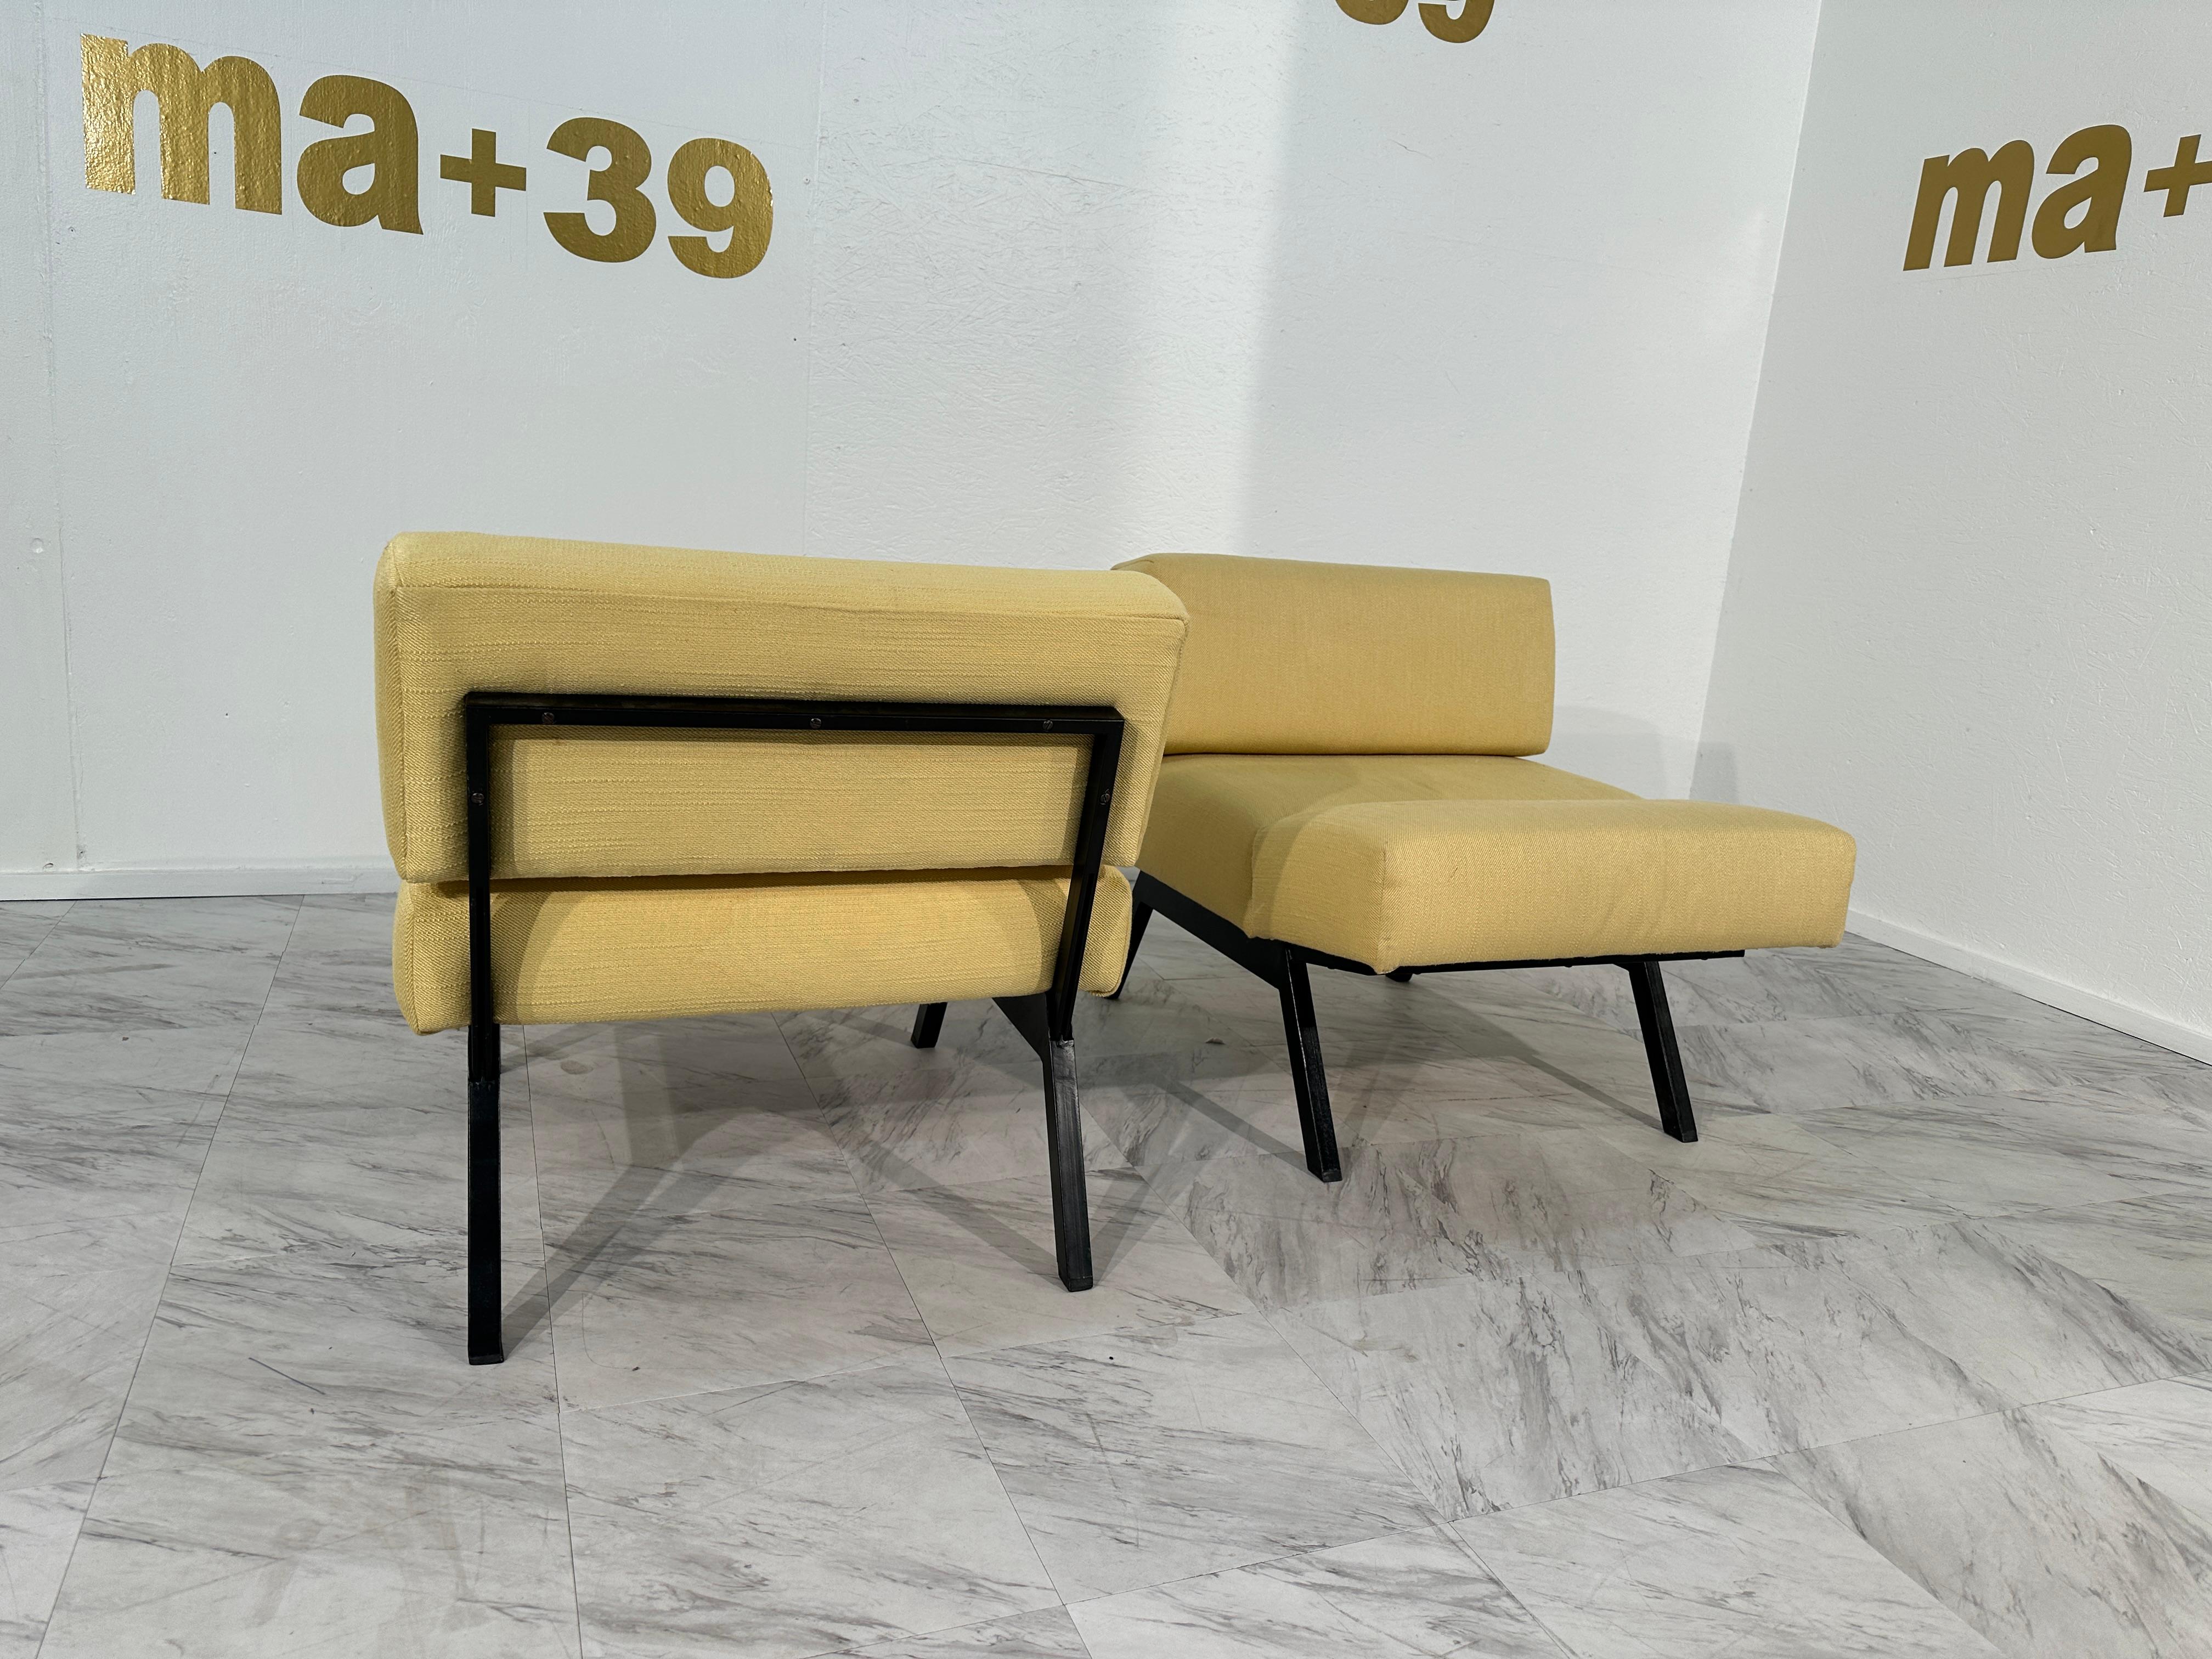 The Set of 2 Panchetto Lounge Chairs, designed by Rito Valla for IPE Bologna in the 1960s, represents an iconic blend of mid-century Italian craftsmanship and innovative design. These lounge chairs boast a distinctive silhouette with their